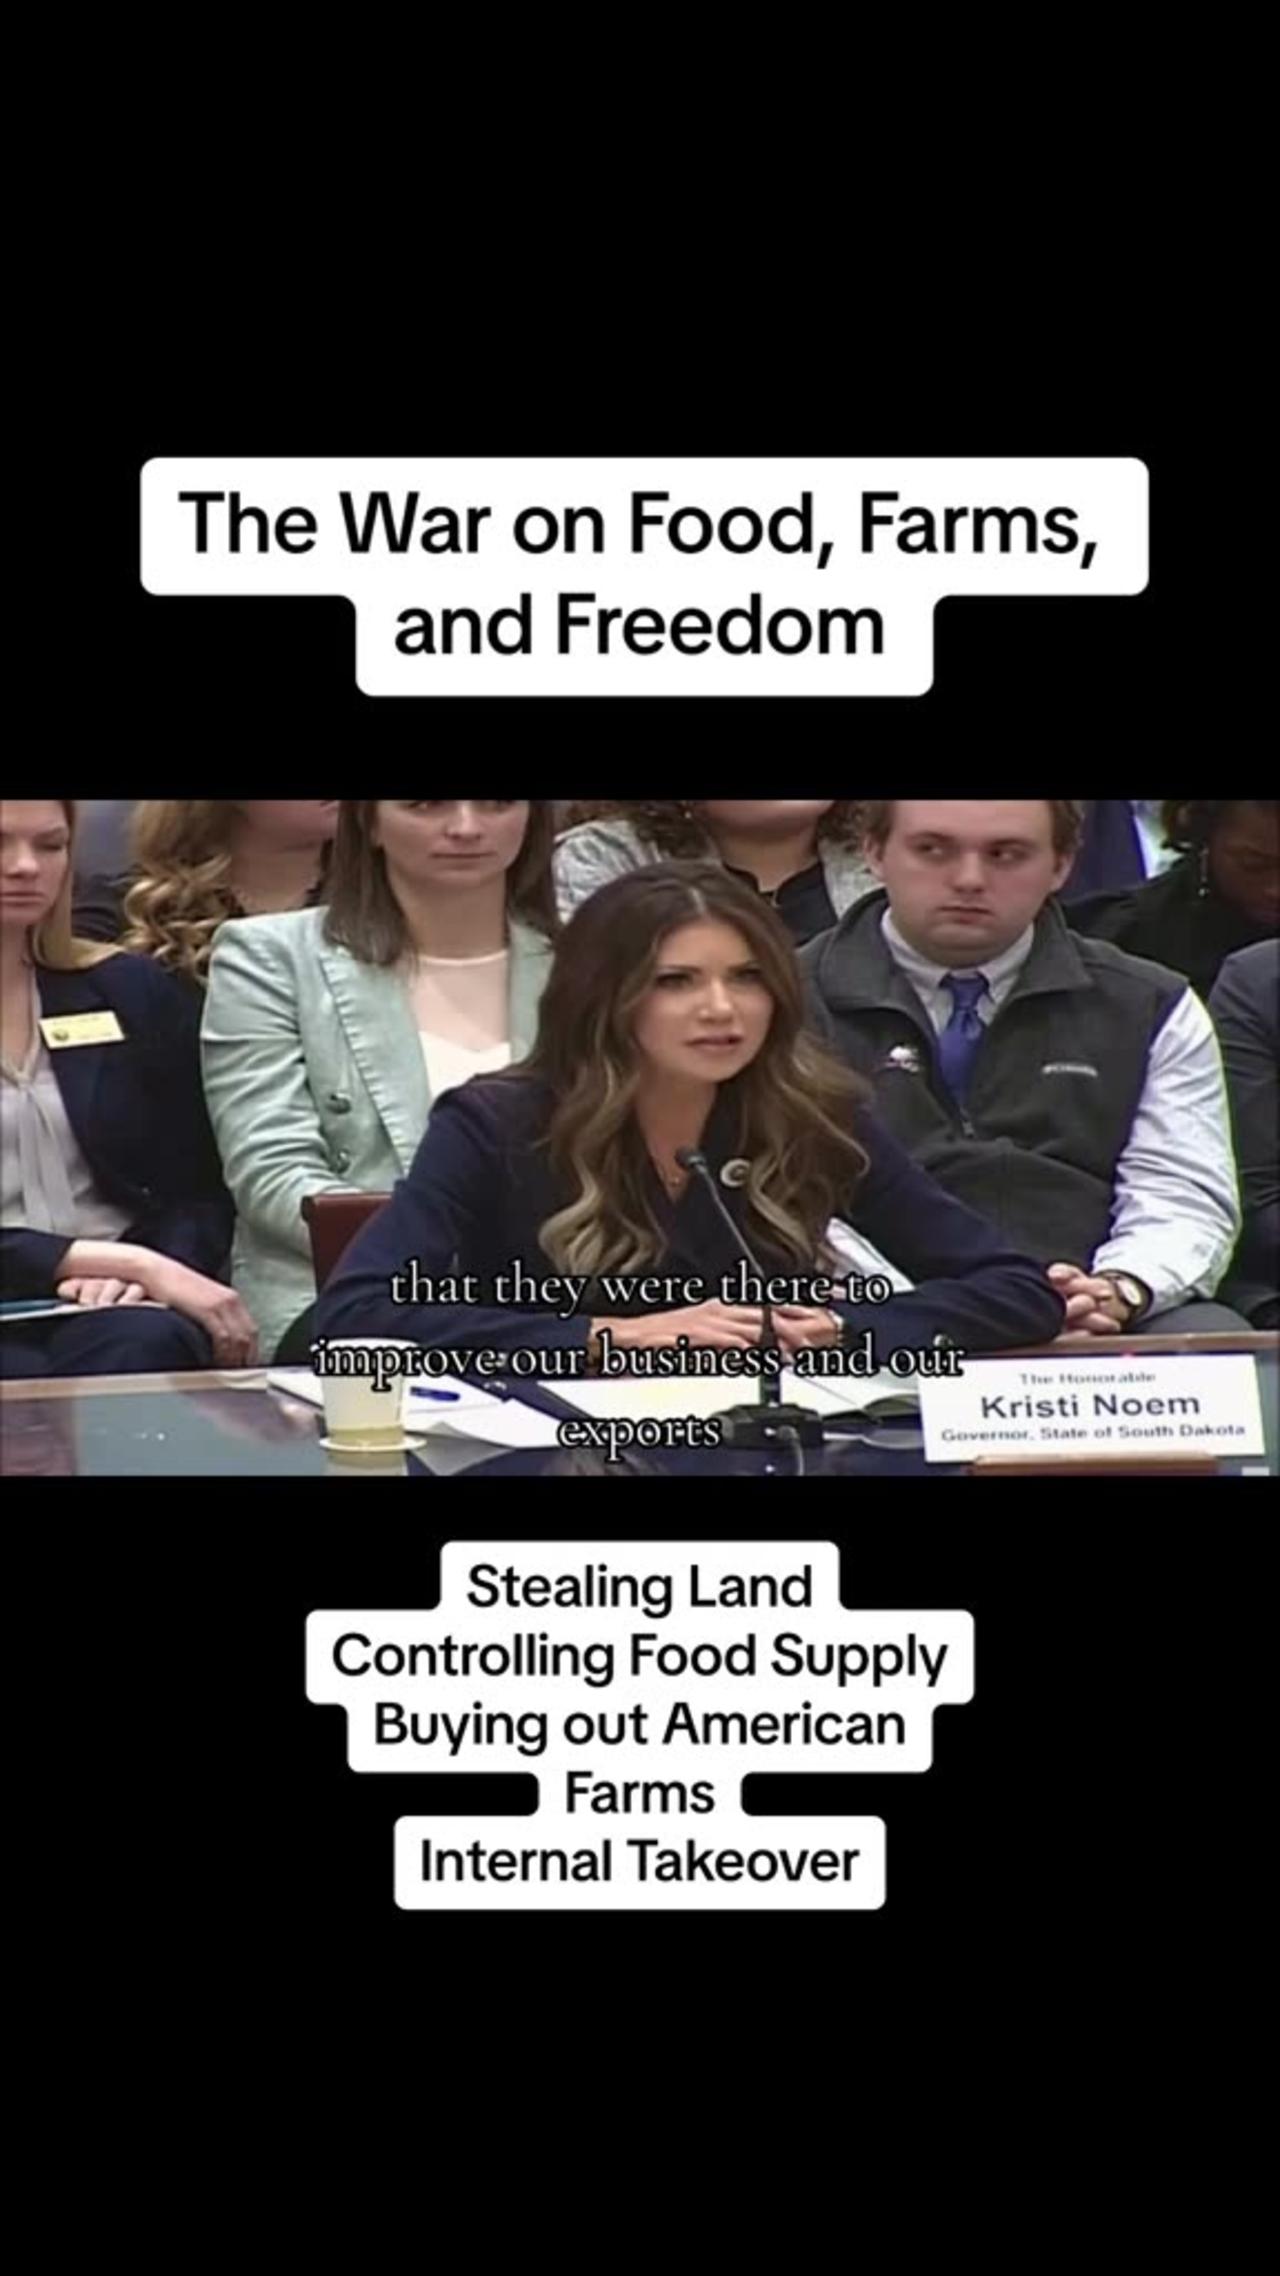 THE WAR ON FOOD, FARMS AND FREEDOM